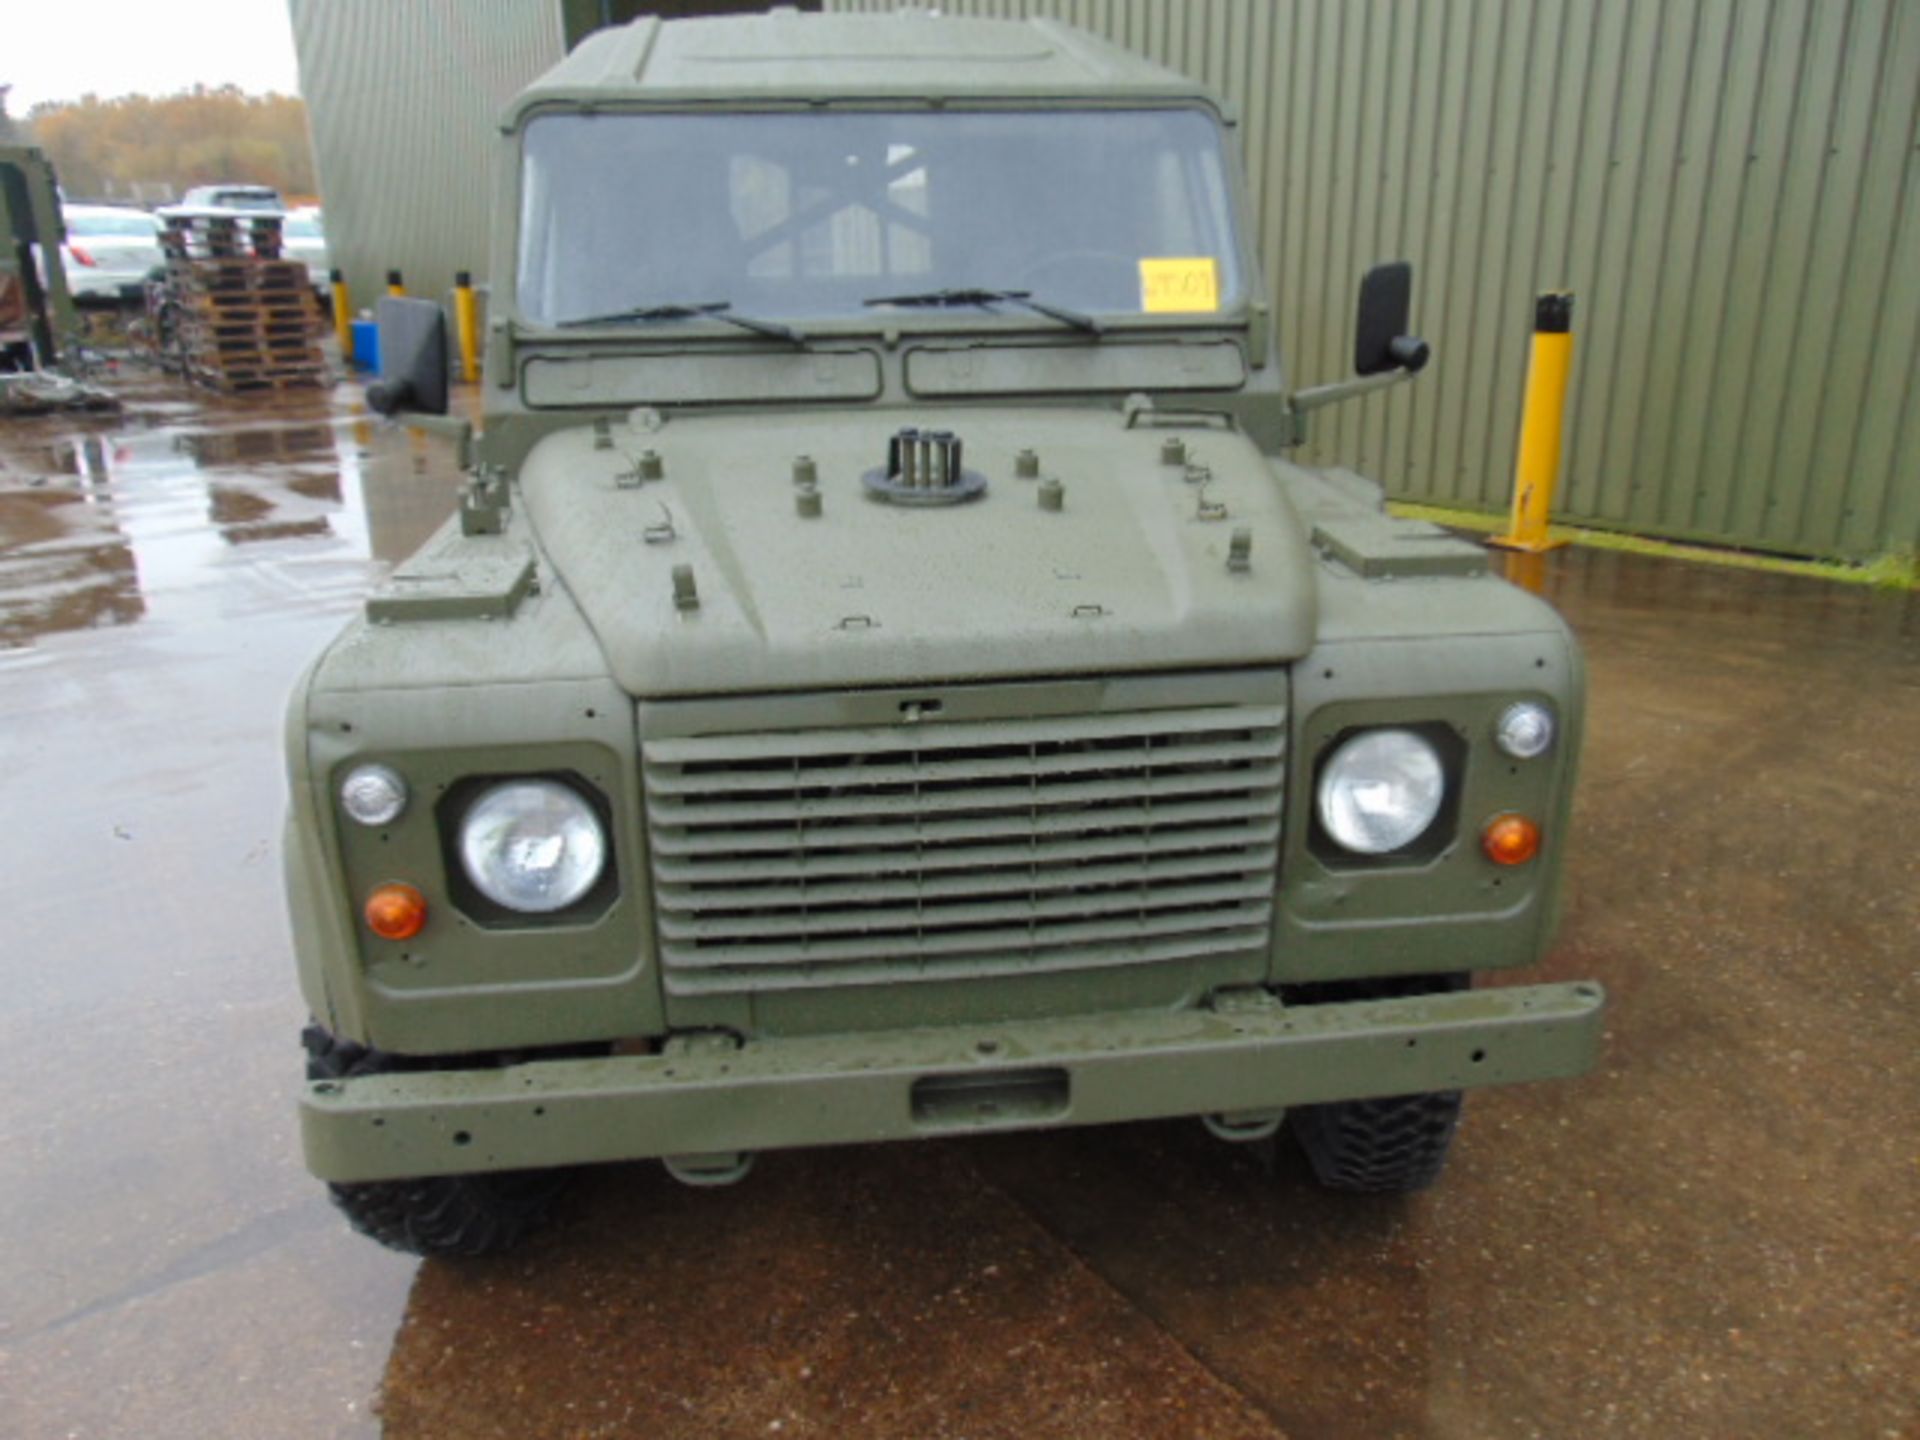 Military Specification Land Rover Wolf 110 Hard Top Left Hand Drive - Image 2 of 25